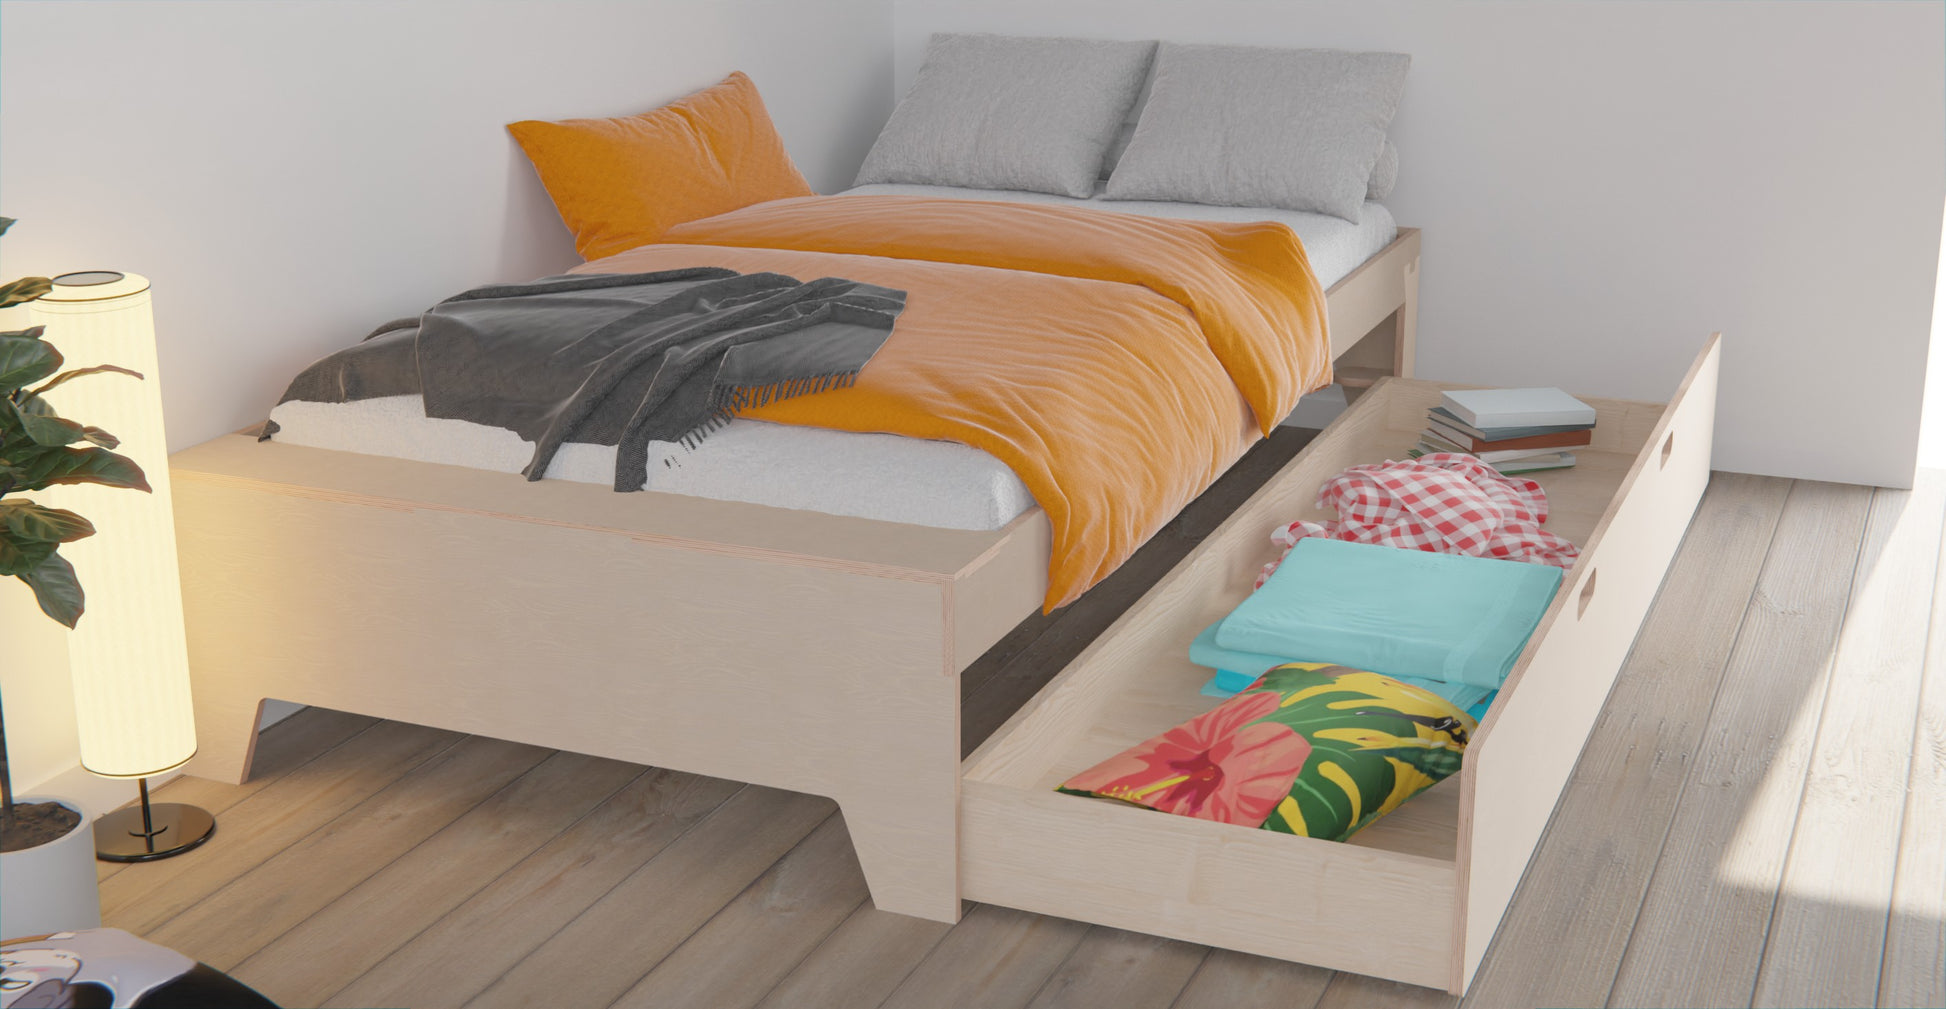 Experience the ultimate combination of style and functionality with our ply bed frame. Designed for kids, it features a storage drawer and customisable guardrails.